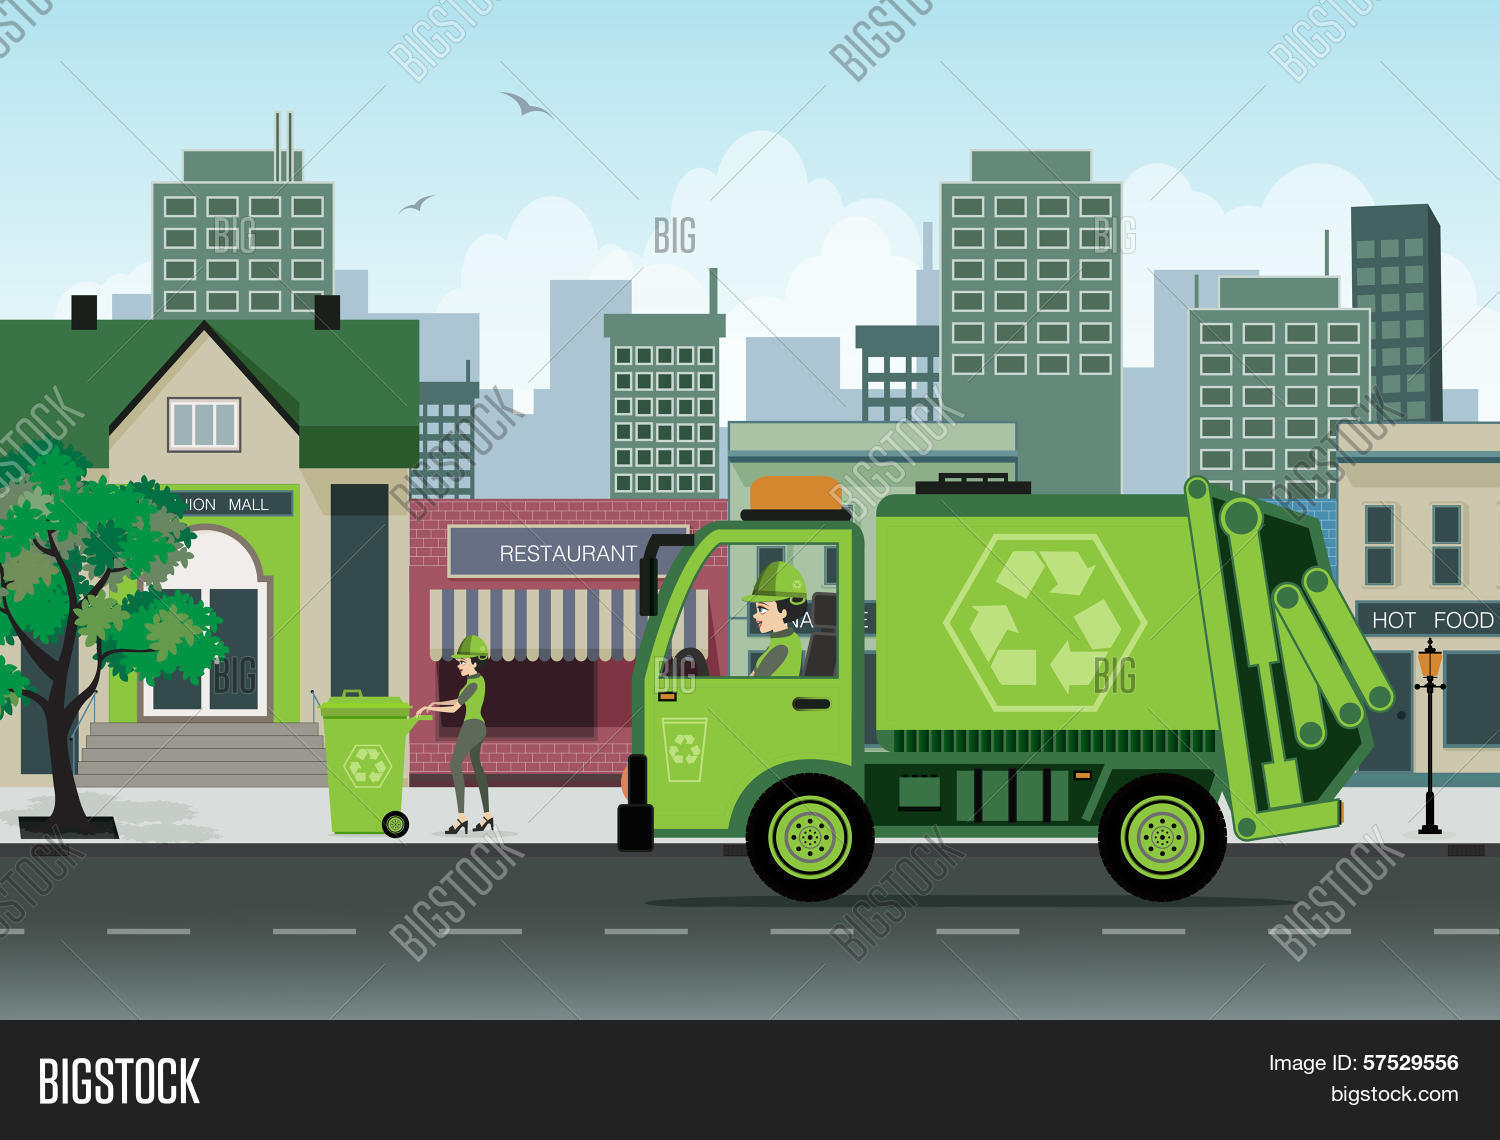 250-r141-recycling-collection.jpg